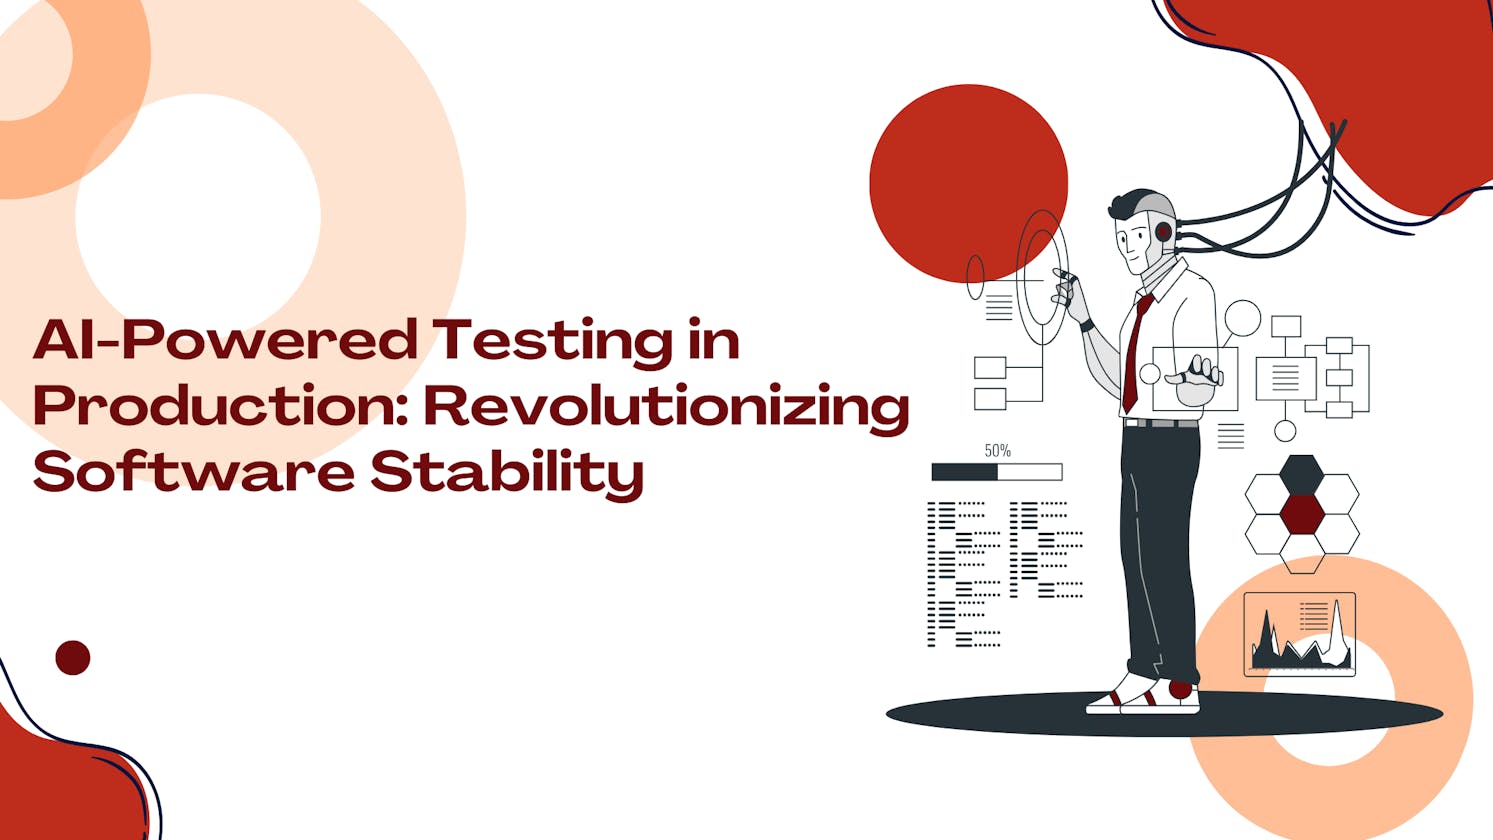 AI-Powered Testing in Production: Revolutionizing Software Stability